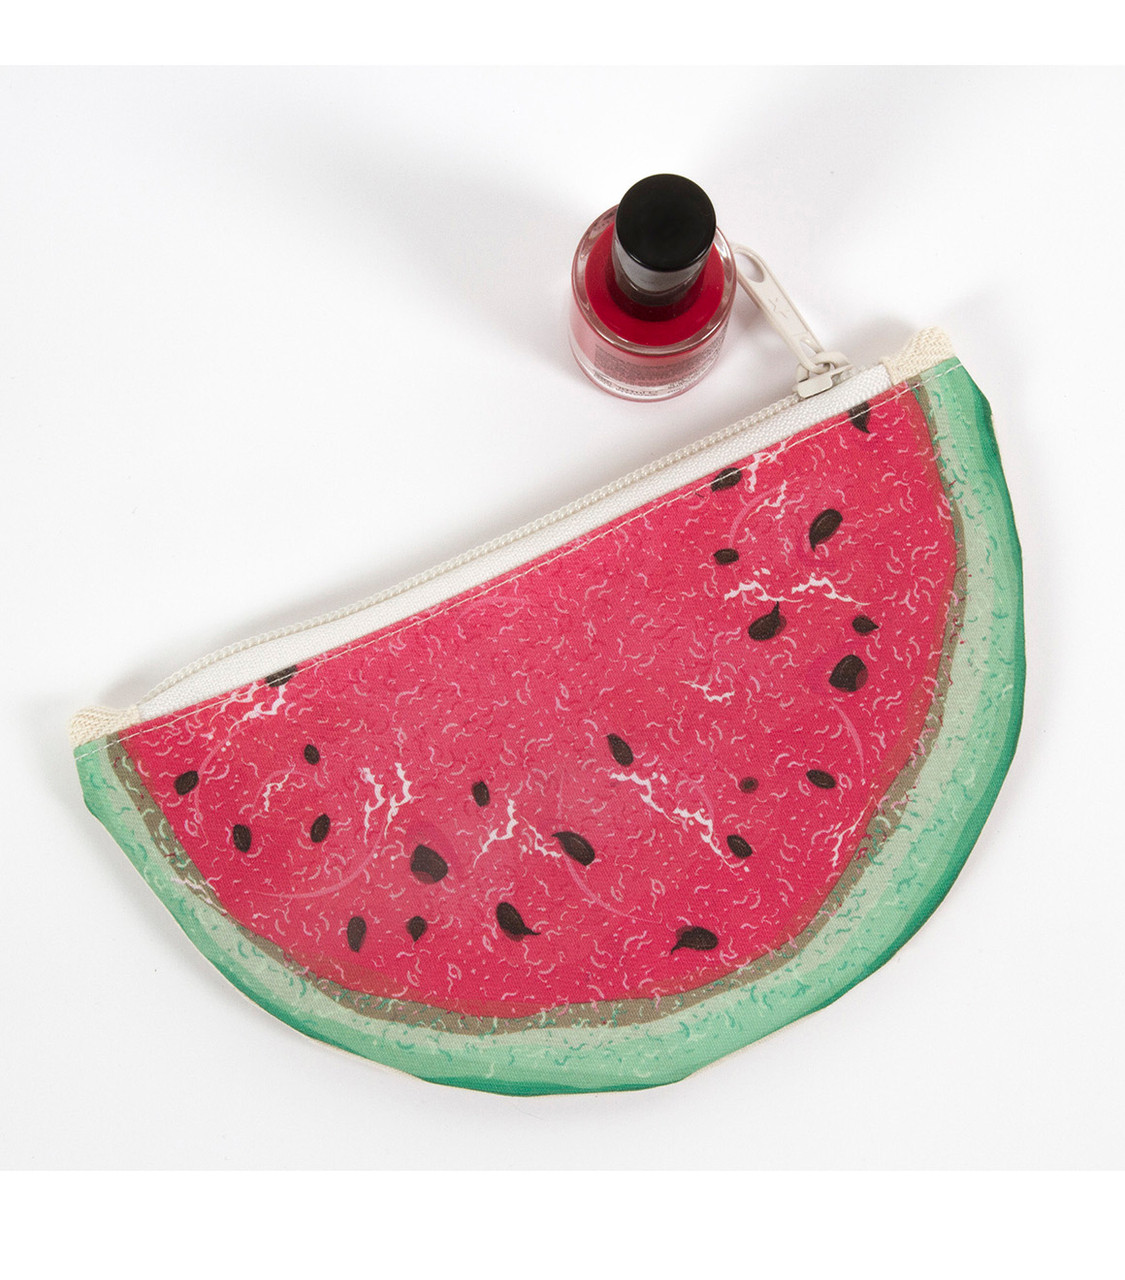 Plush Watermelon Fruit Coin Neoprene Bags 10 Fashionable Styles For School  Kids Small Neoprene Bag Case Popular Coin Purses And Gifts From  Backintimeshop1970, $0.66 | DHgate.Com